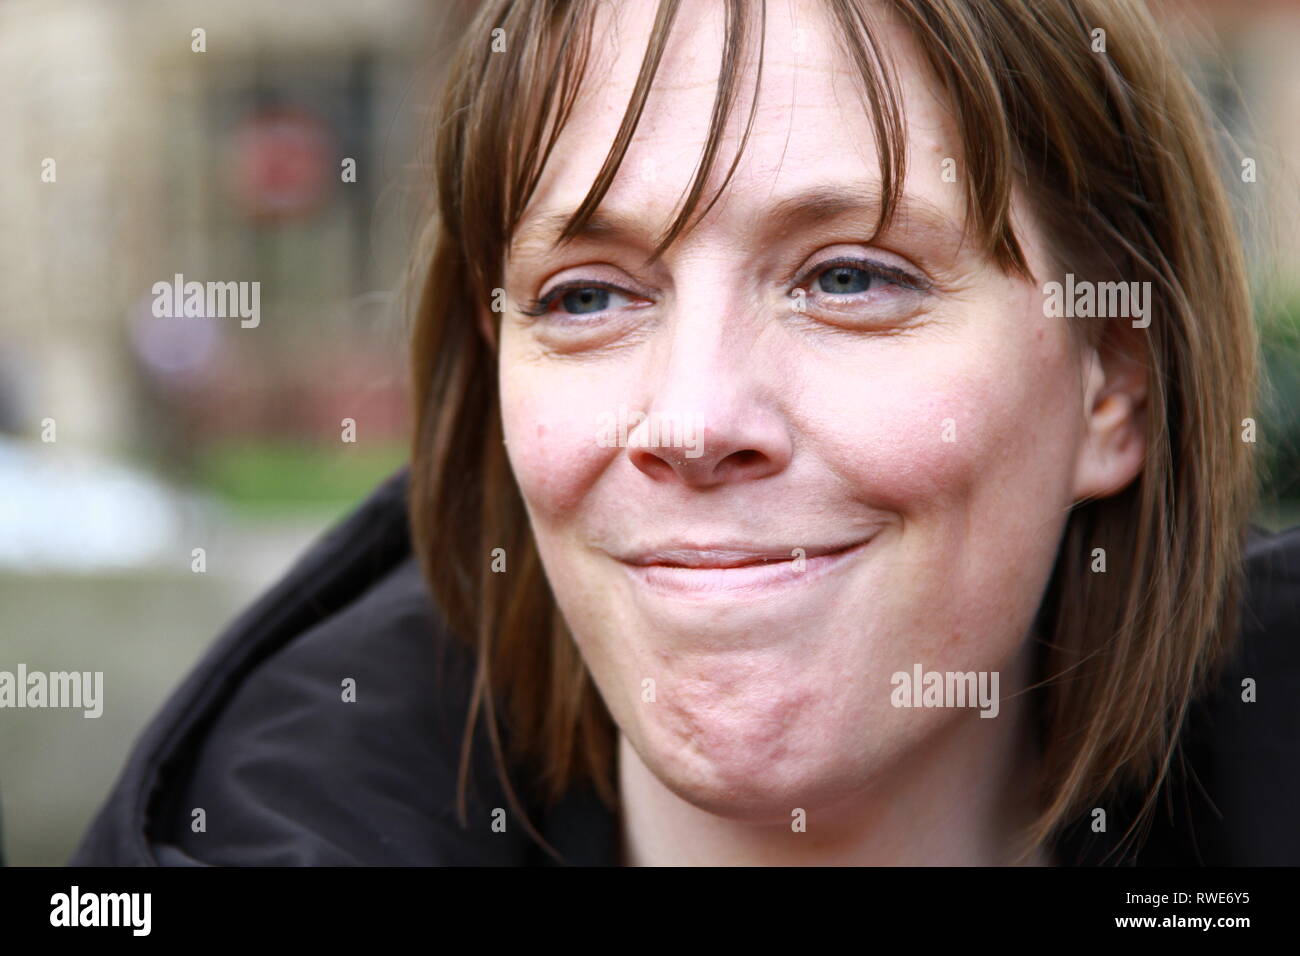 Jess Phillips member of parliament for Birmingham Yardley pictured in Parliament Square, Westminster, London, UK  whilst attending a gathering of various organisations for women's rights on 5th March 2019. Harassment in the work place. Muslim women's network UK. Labour party MPS. British politicians. UK Politics. UK politicians. Stock Photo